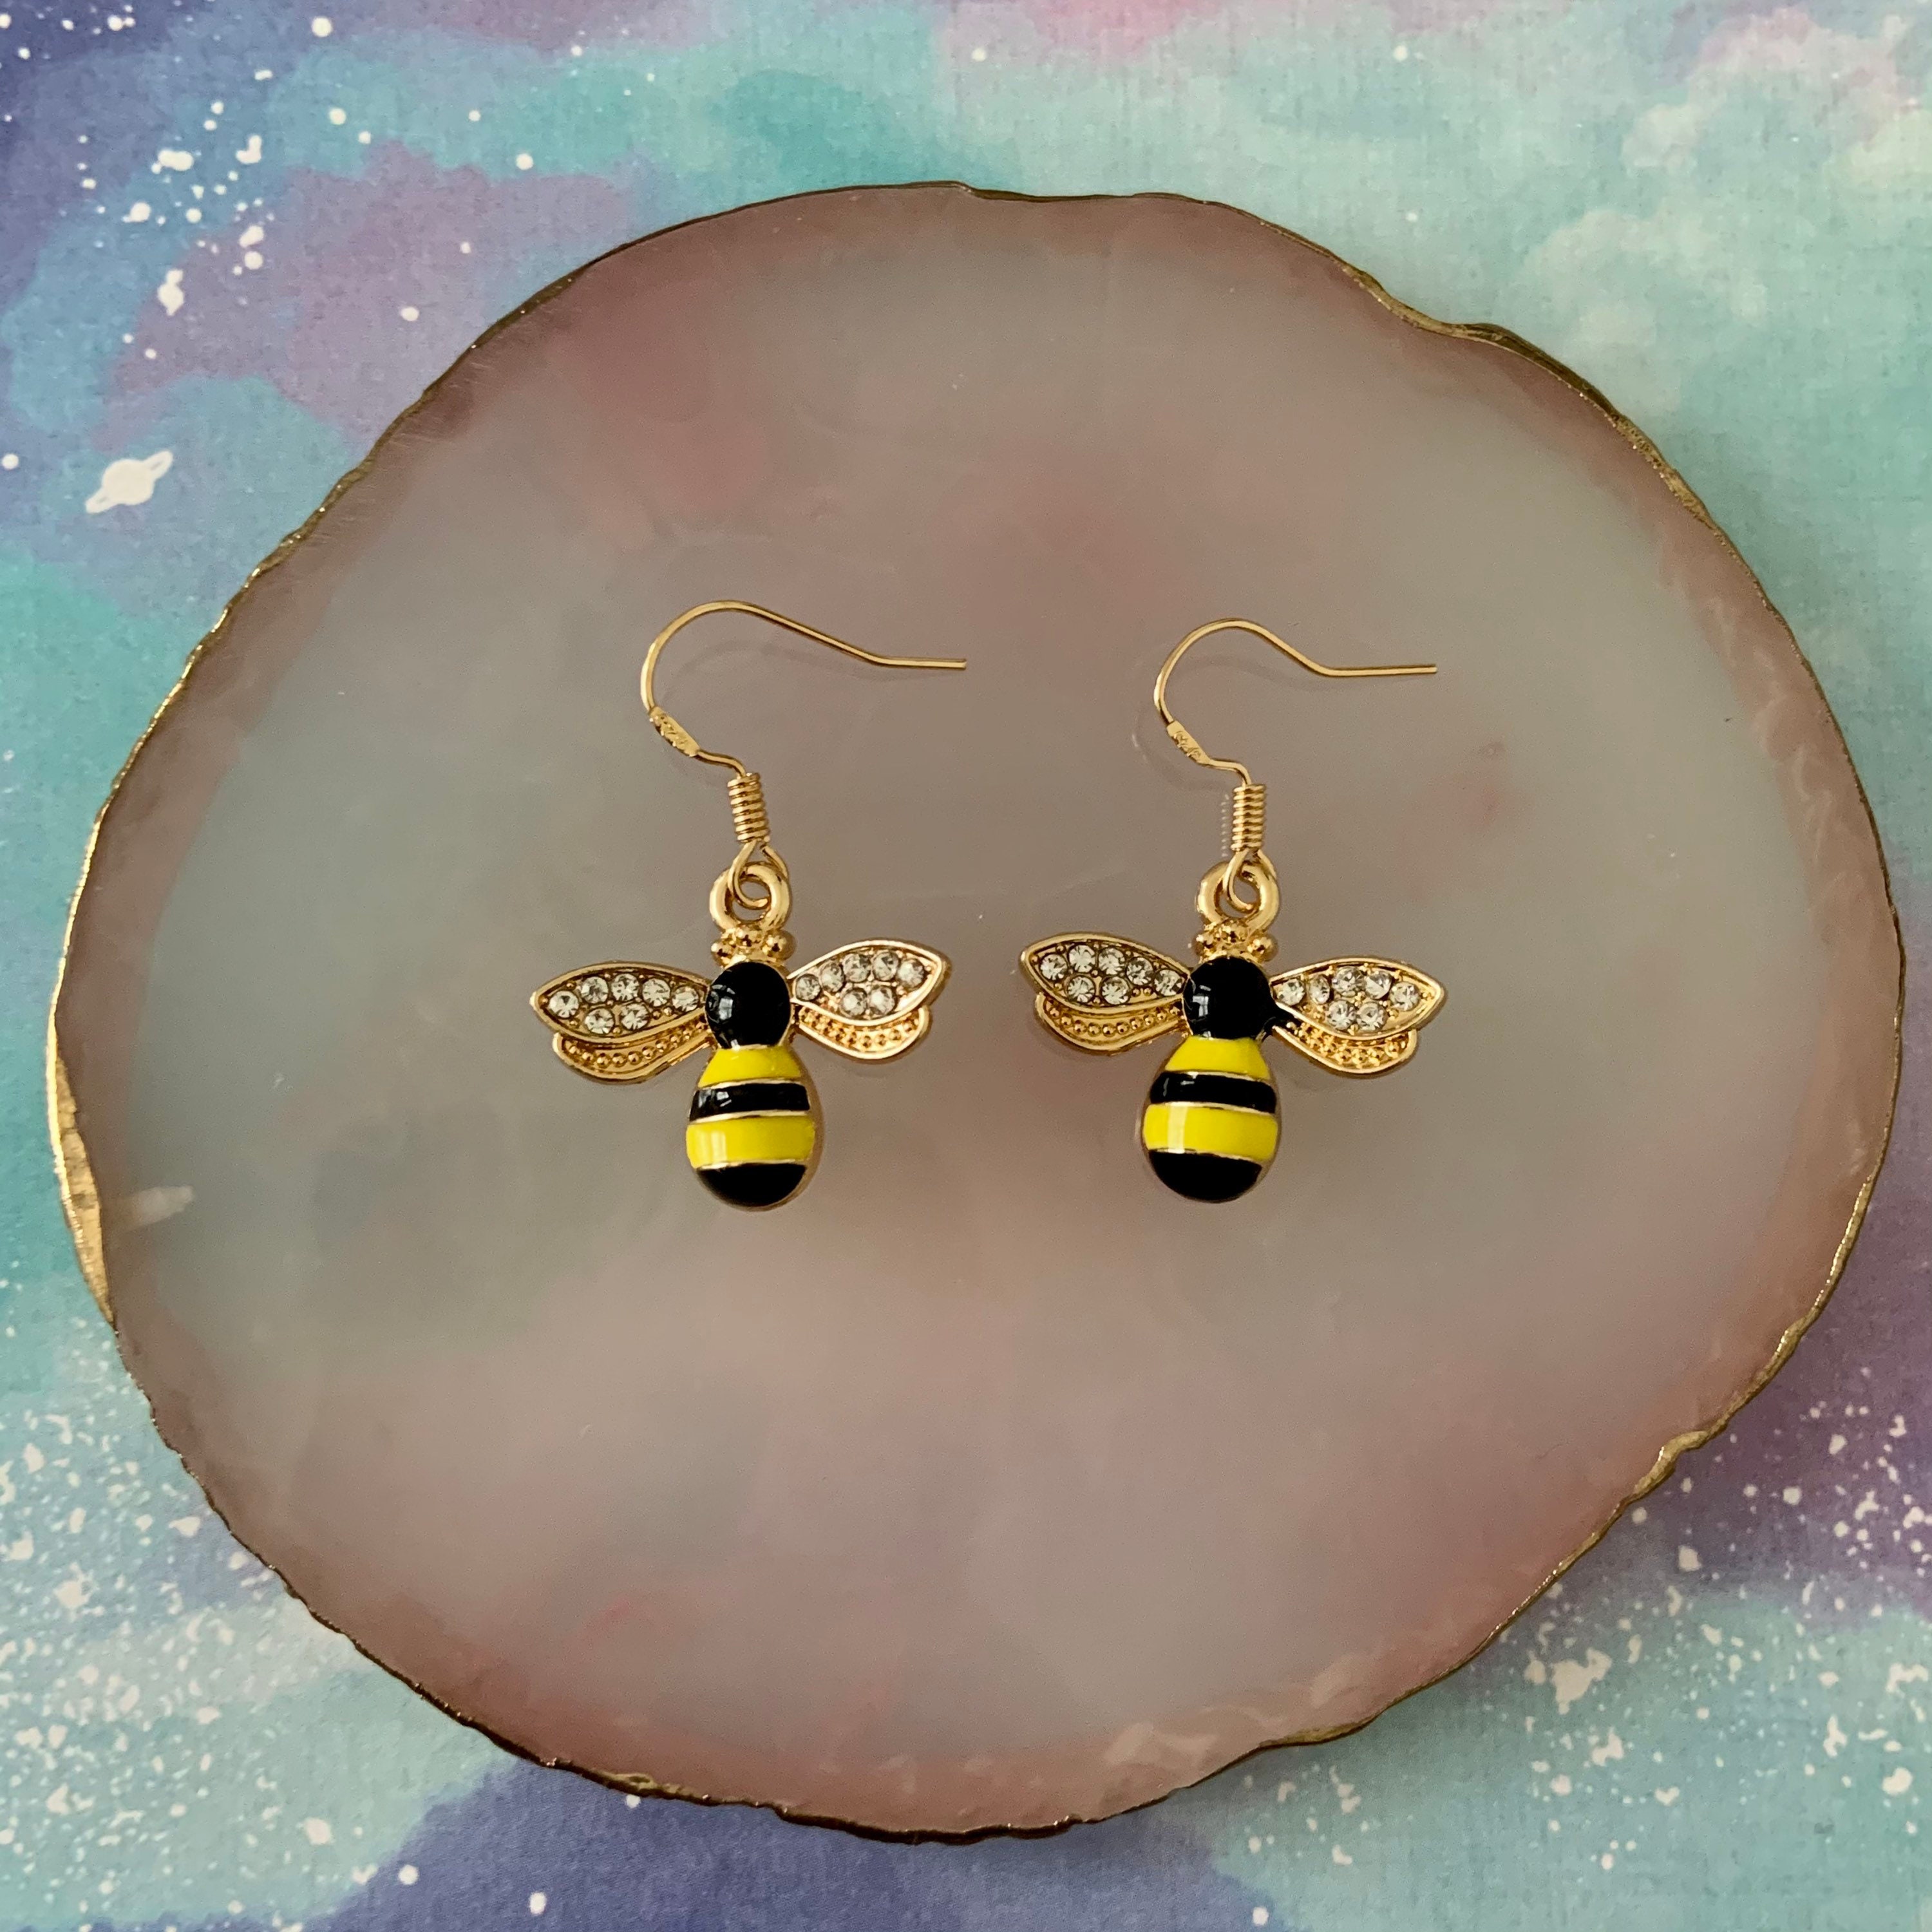 Cute Bumble Bee Earrings gold plated hypoallergenic e-girl | Etsy